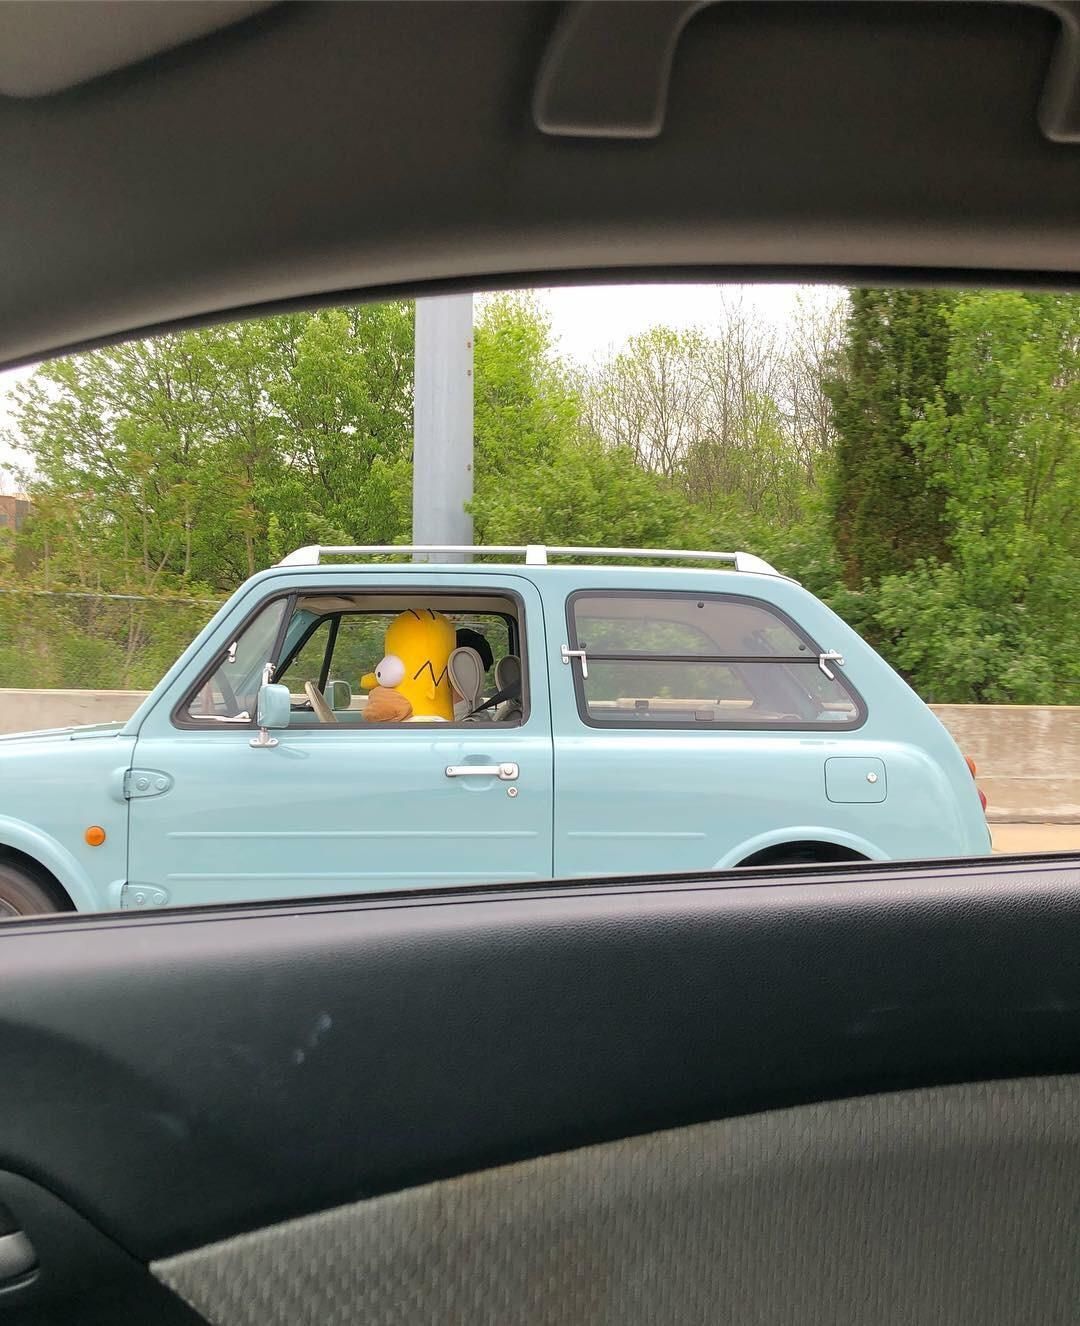 My boyfriend saw this while driving on the interstate in Louisville, KY.